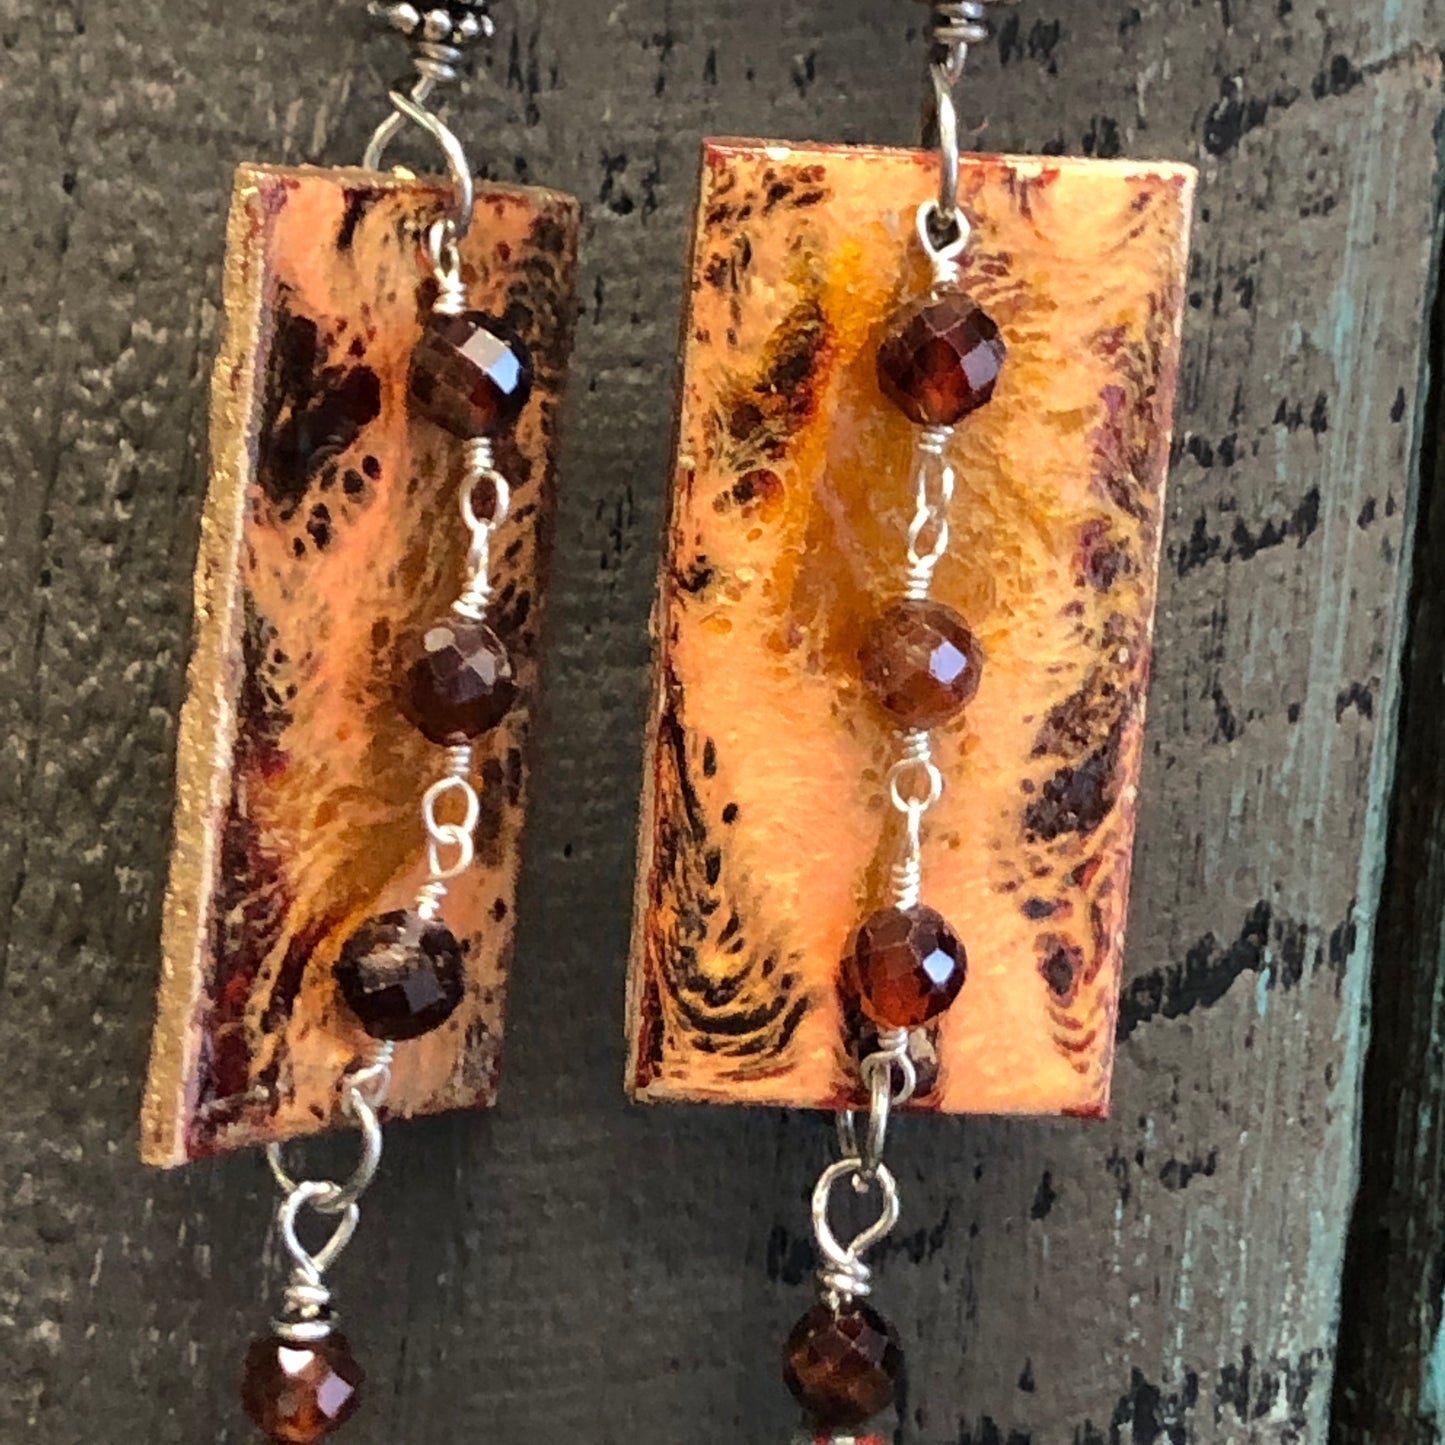 Hilo Hot, Paint Pour Earrings, Czech Beads and Faceted Garnets